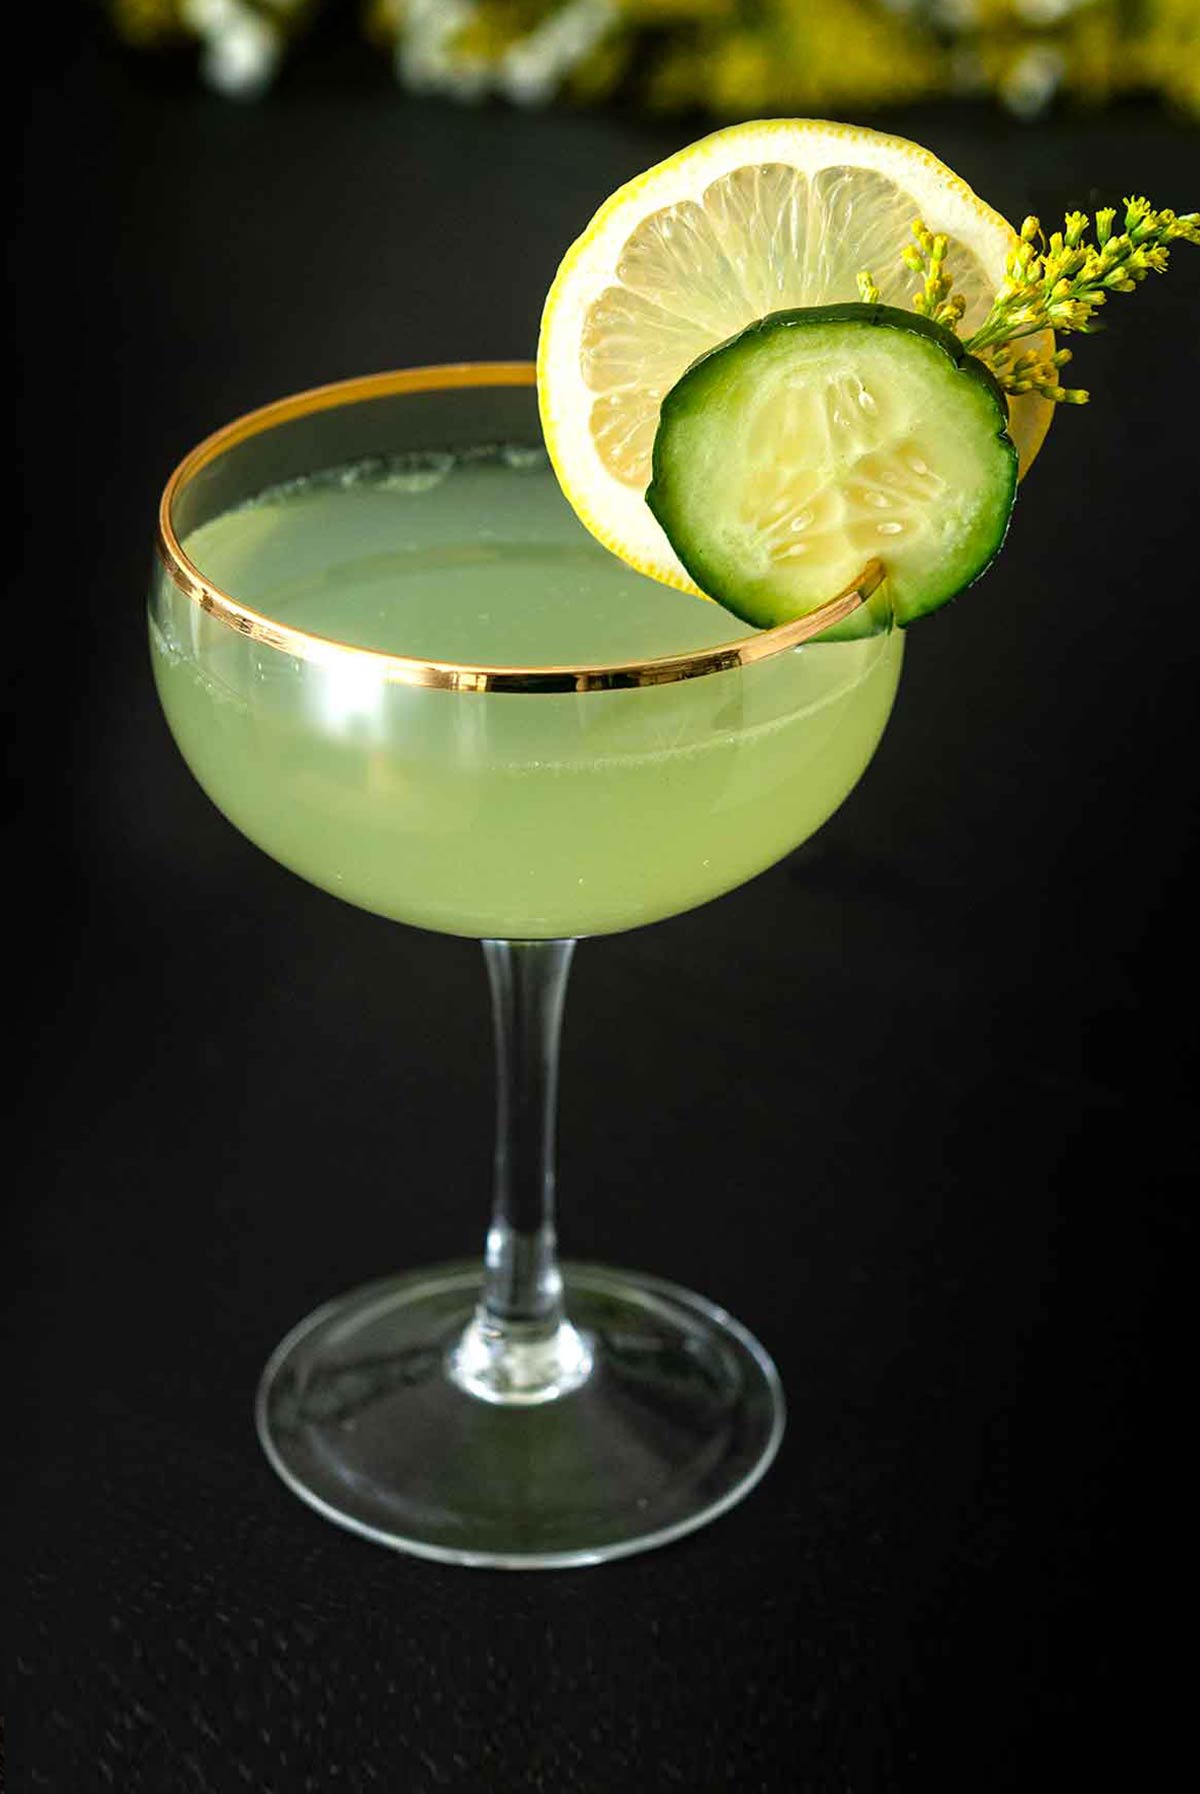 A cocktail in a coup glass, garnished with a cucumber slice, lemon, and wispy flower on a table.